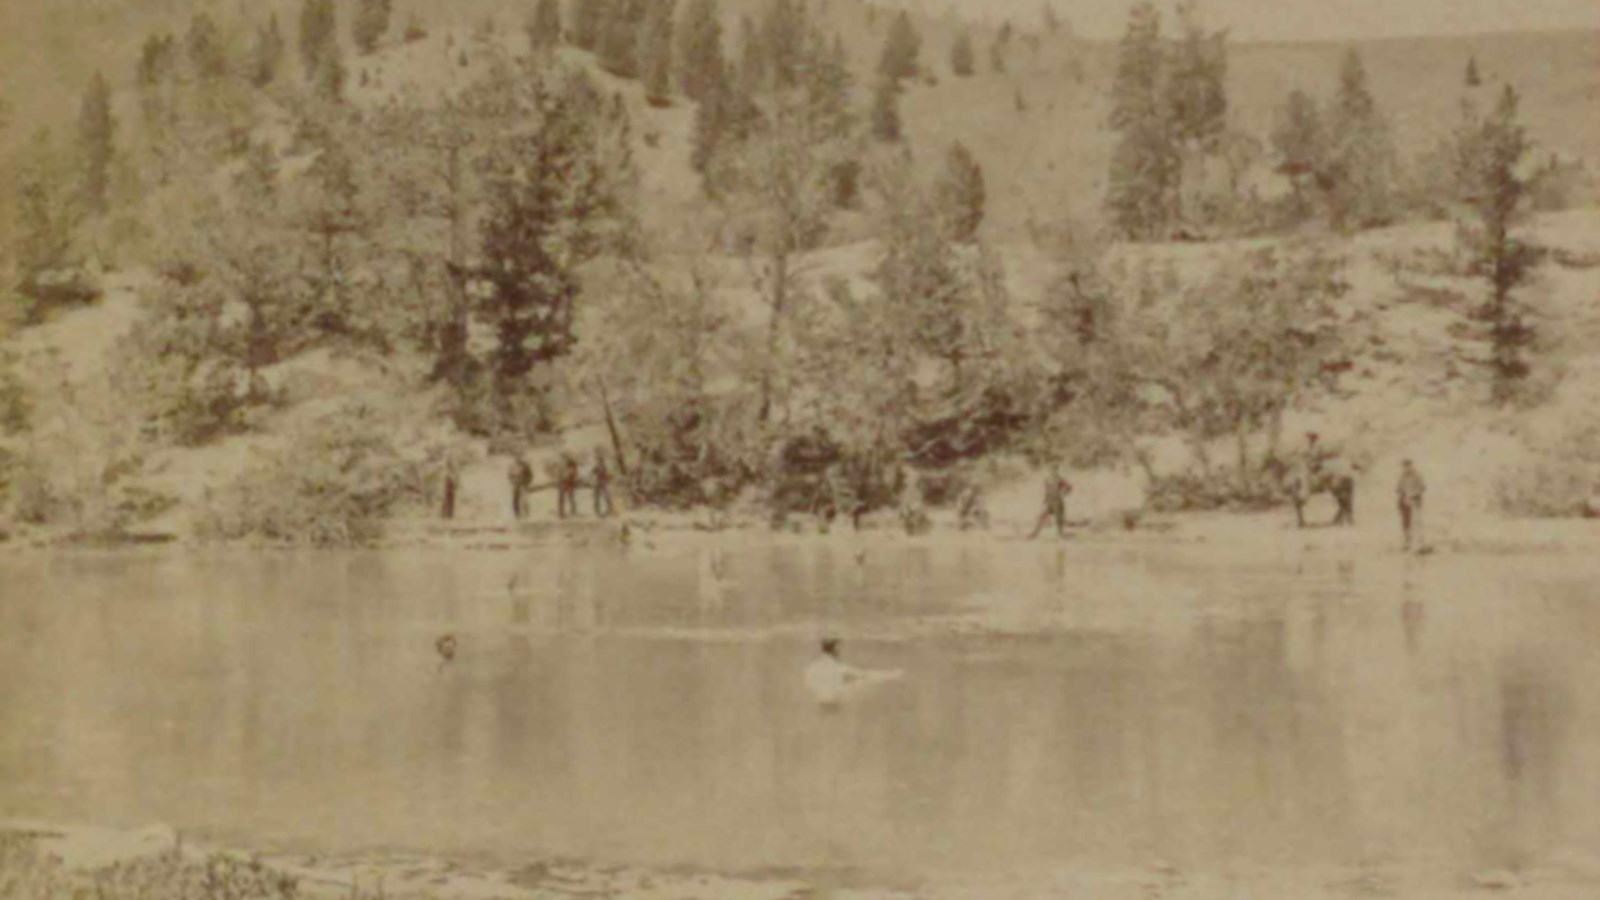 Historic photograph of men bathing in the hot spring while others watched.